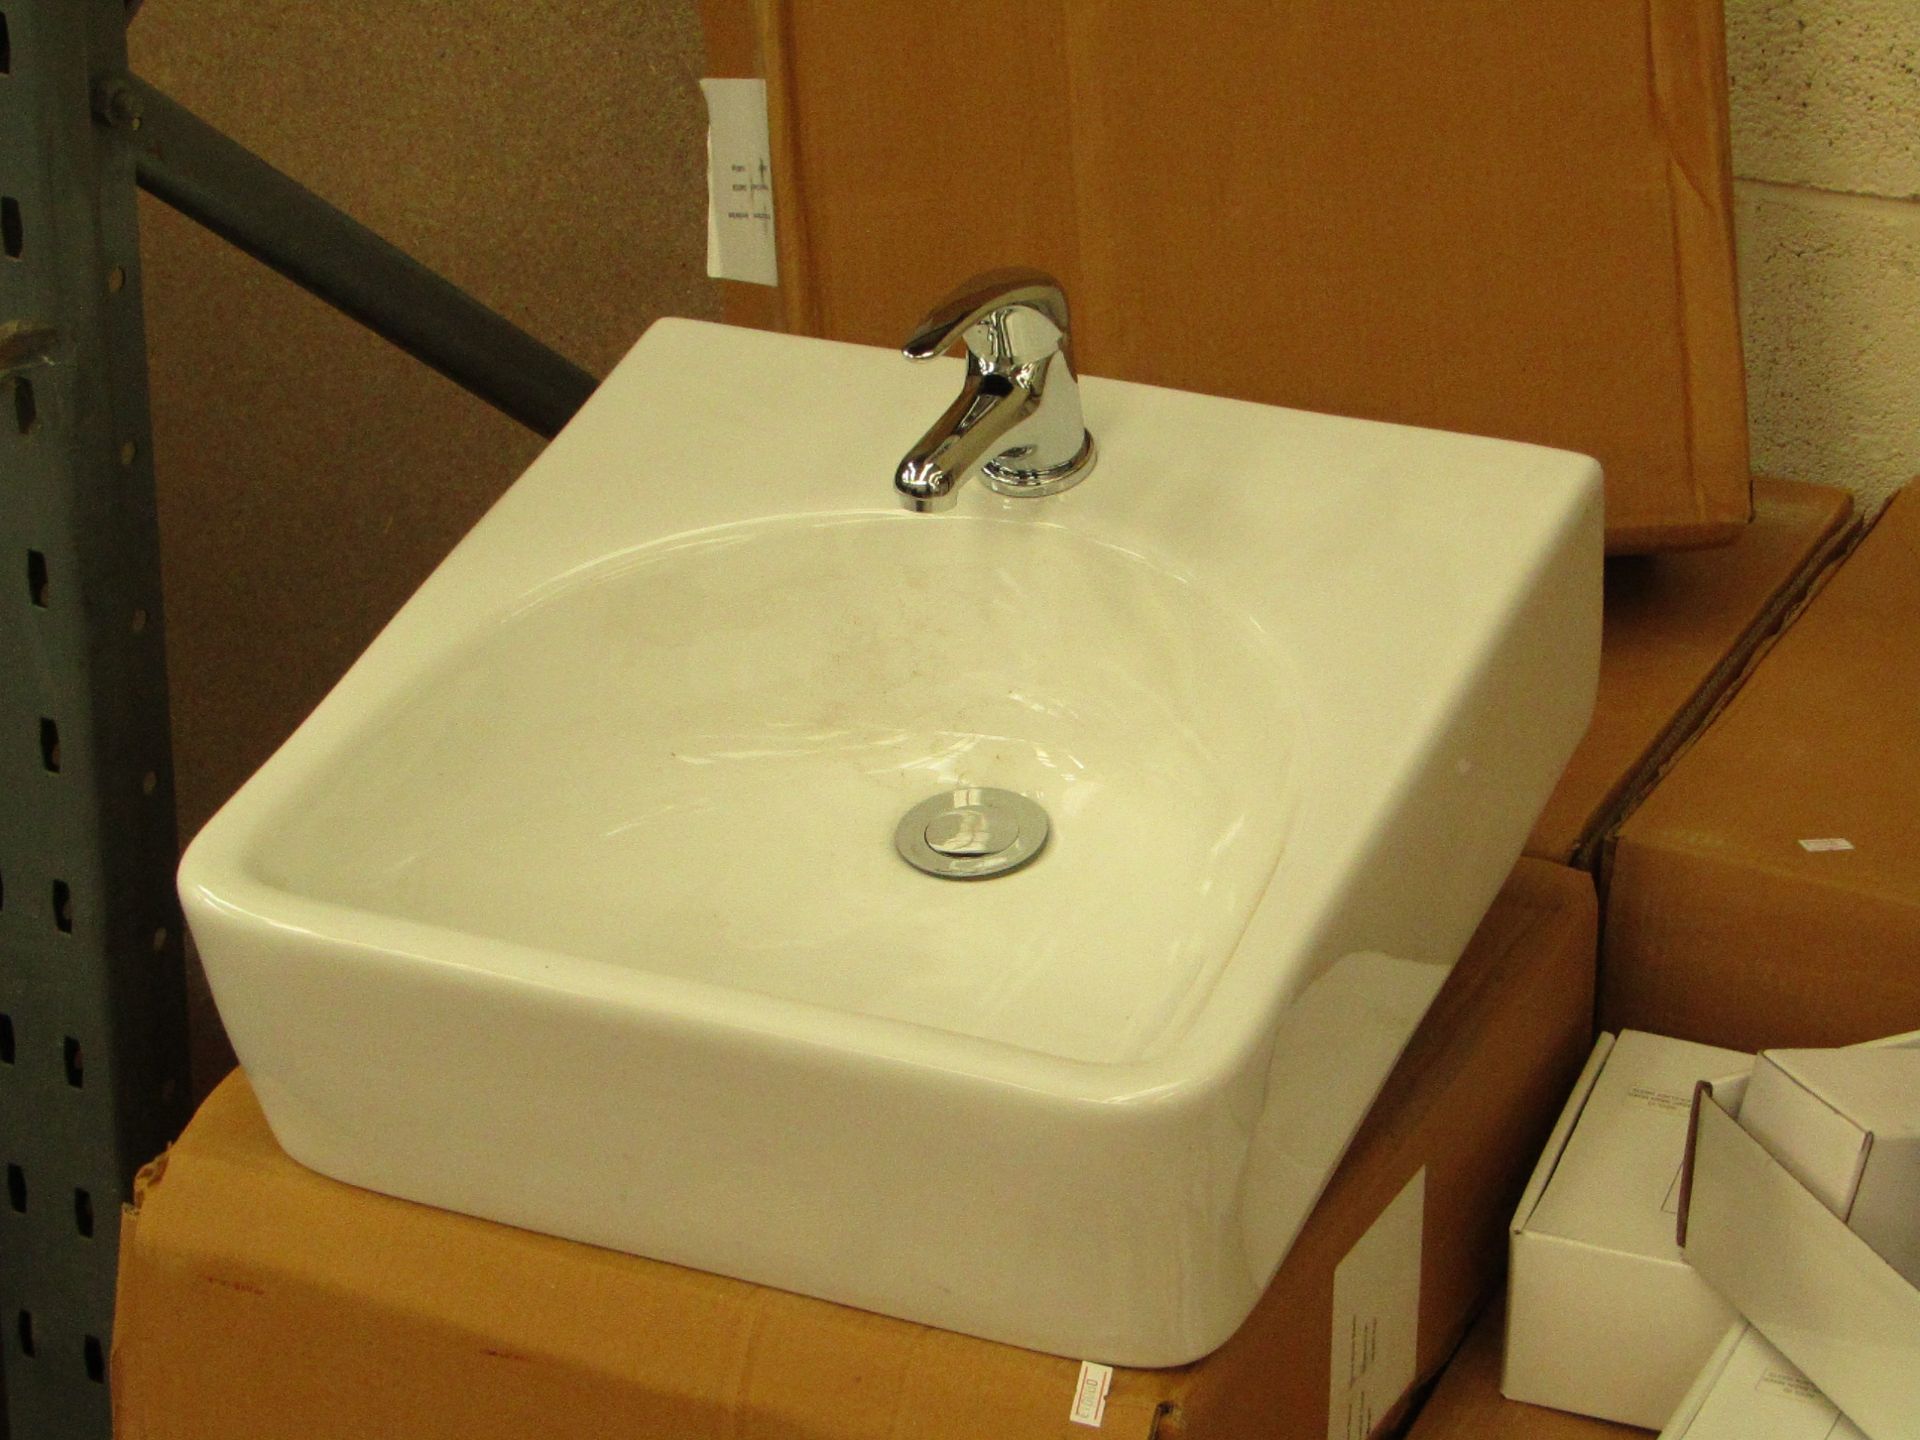 Verve bowl basin with a mono block mixer tap, new and boxed.